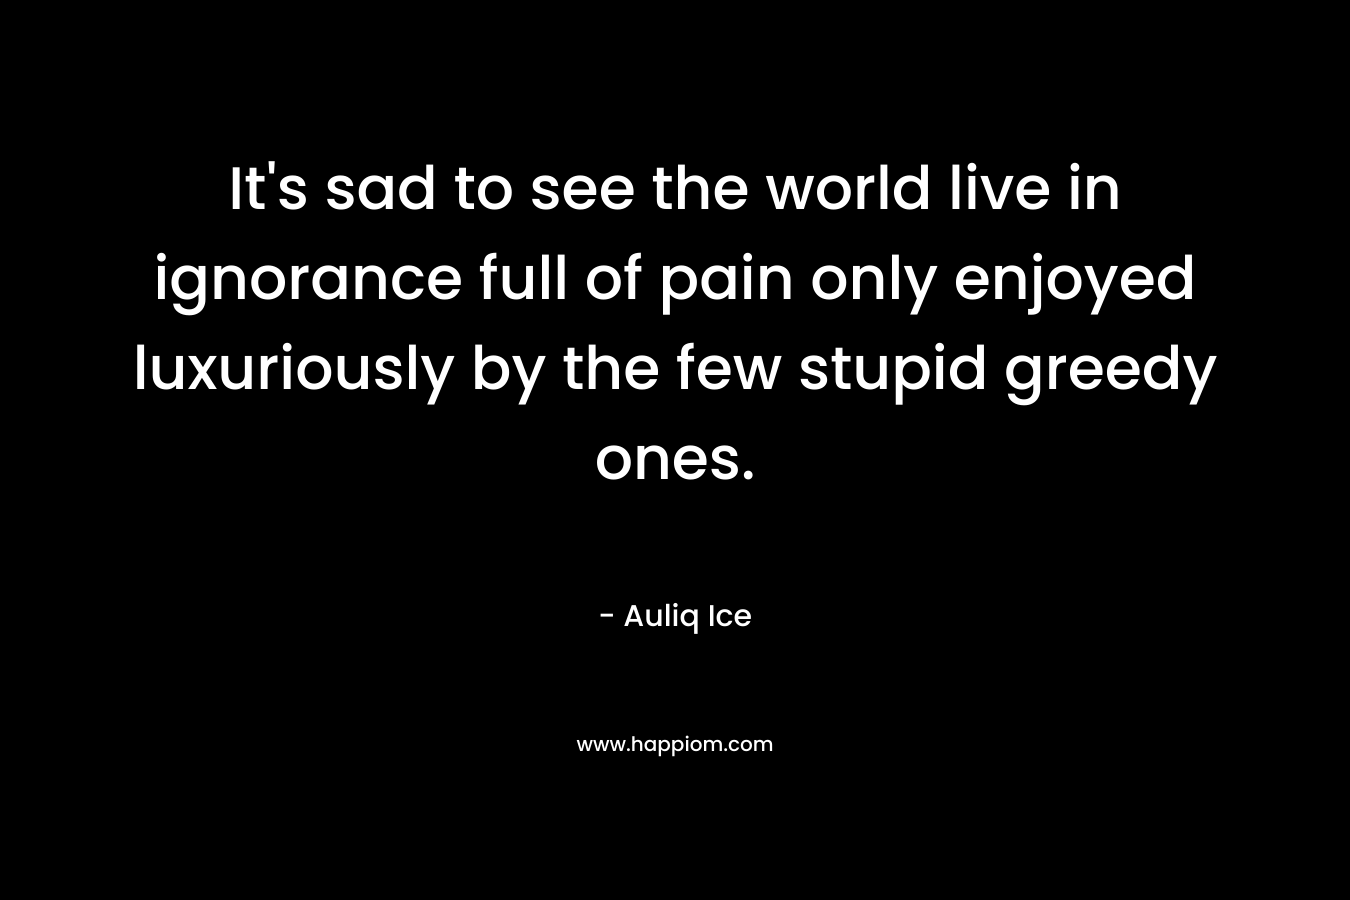 It's sad to see the world live in ignorance full of pain only enjoyed luxuriously by the few stupid greedy ones.